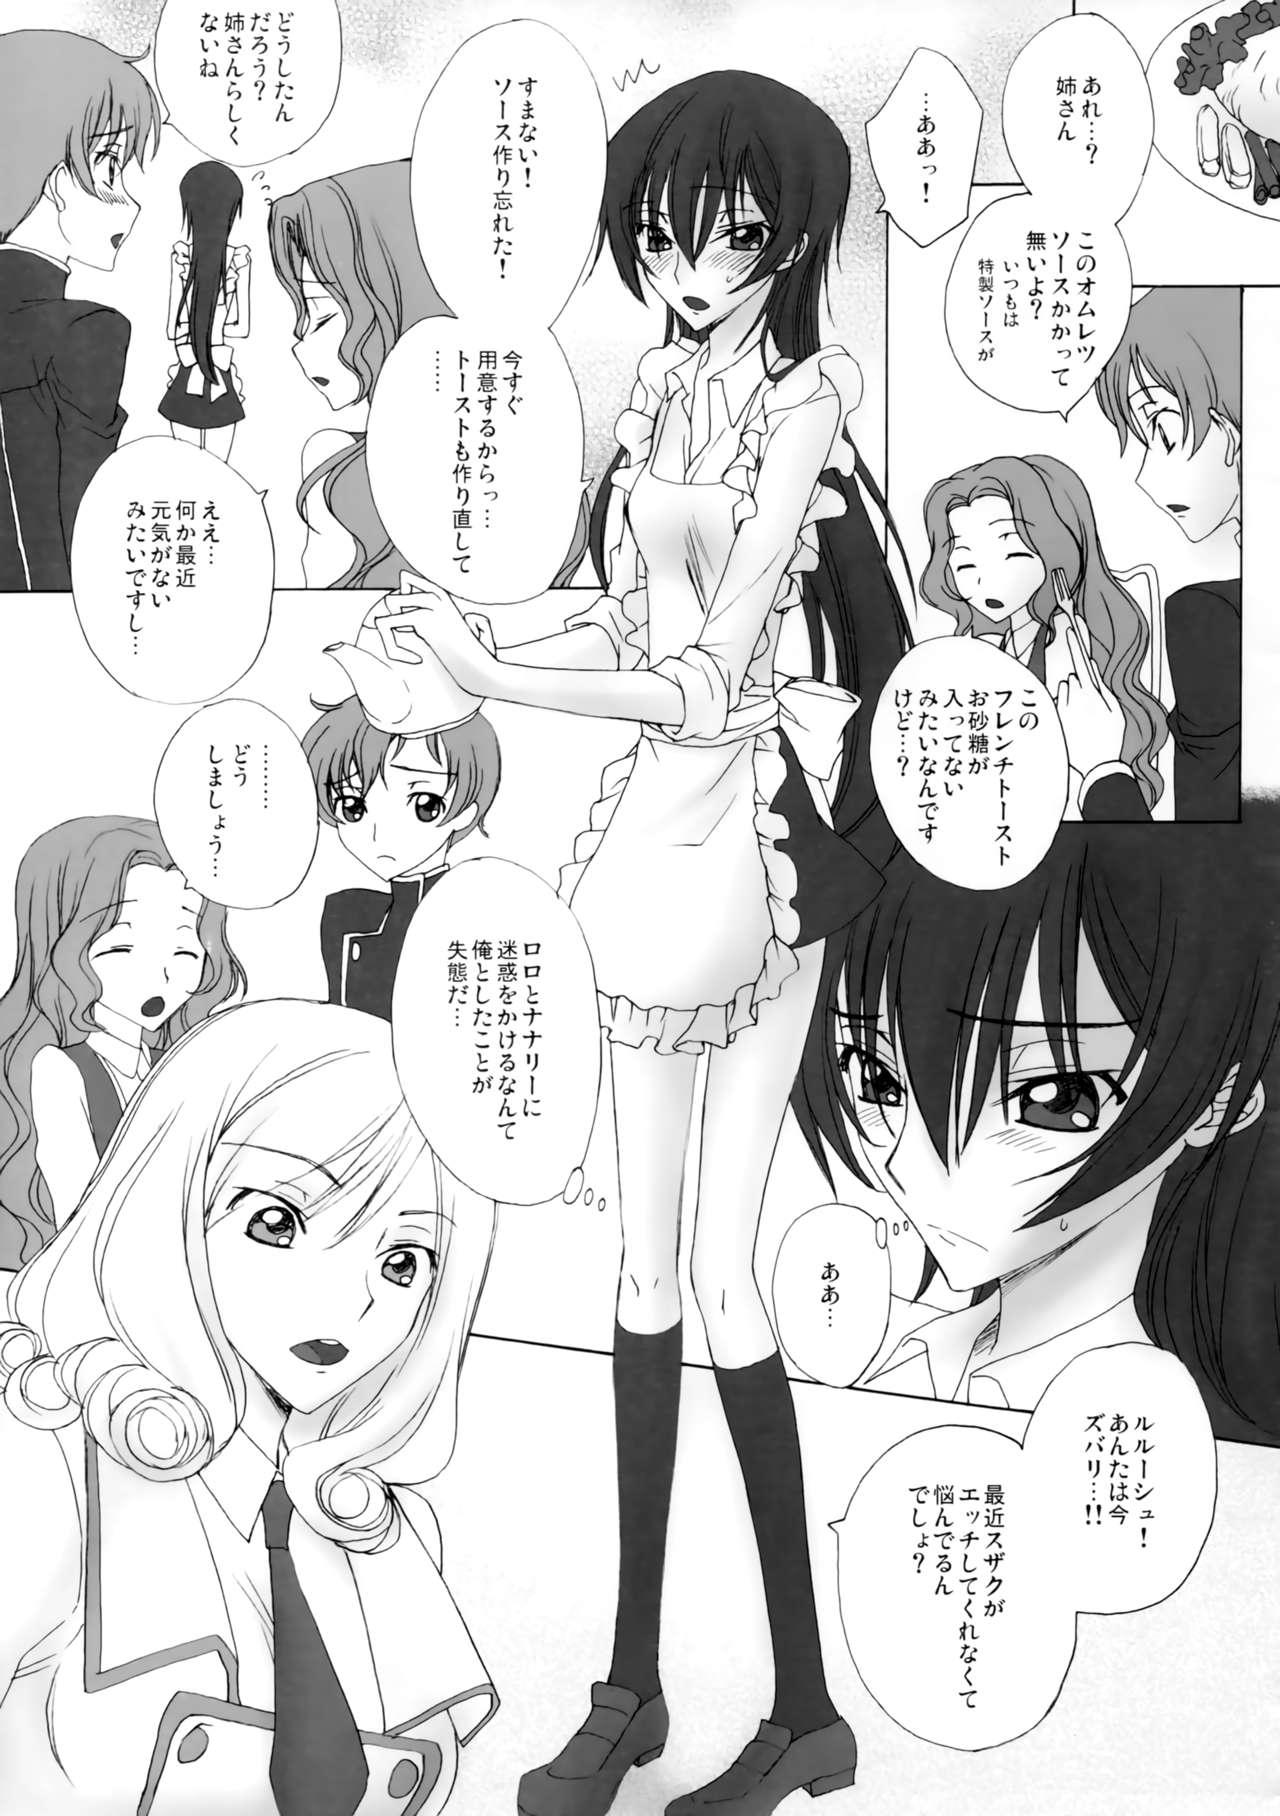 Load Zettai Otome Evolution! - Code geass Pussyeating - Page 4